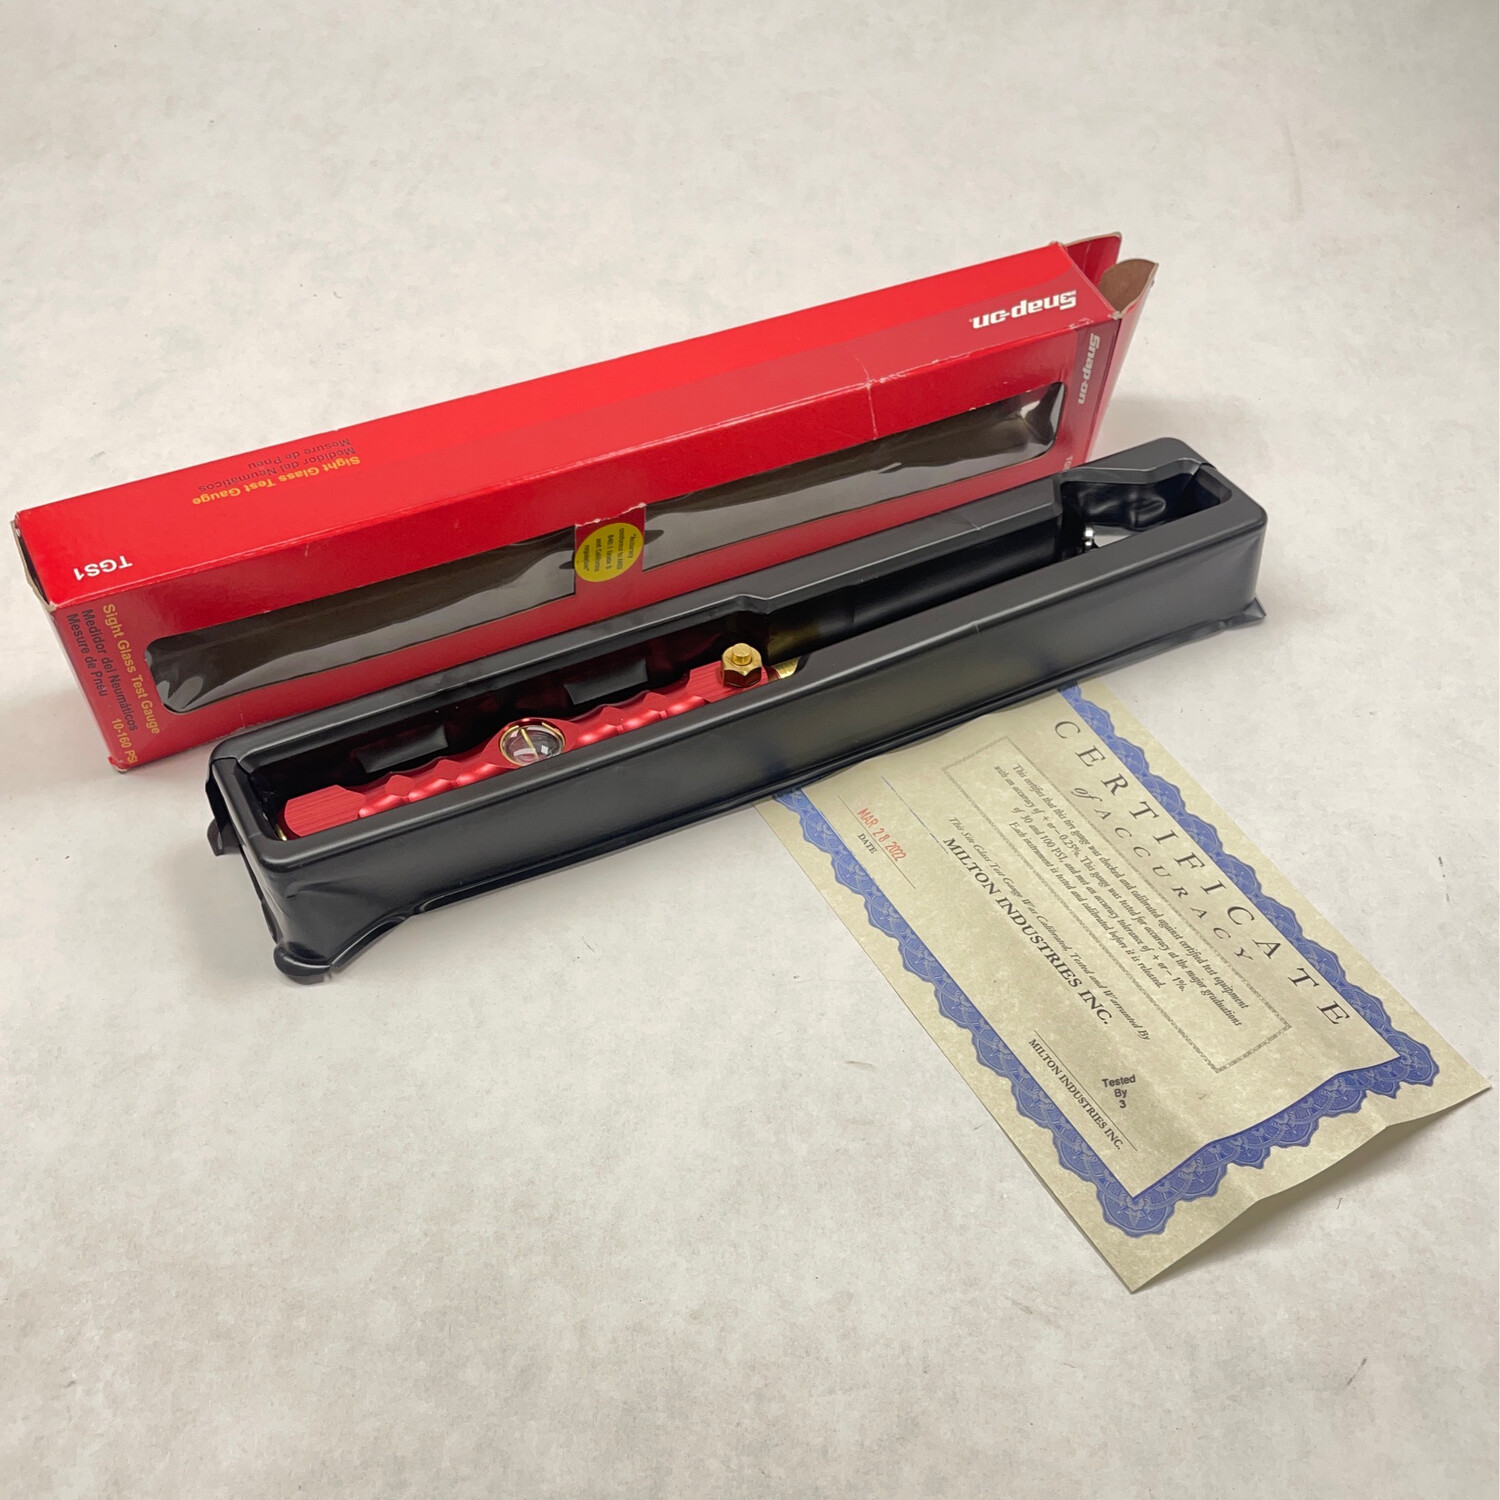 New Snap On Sight Glass Test Gauge, TGS1